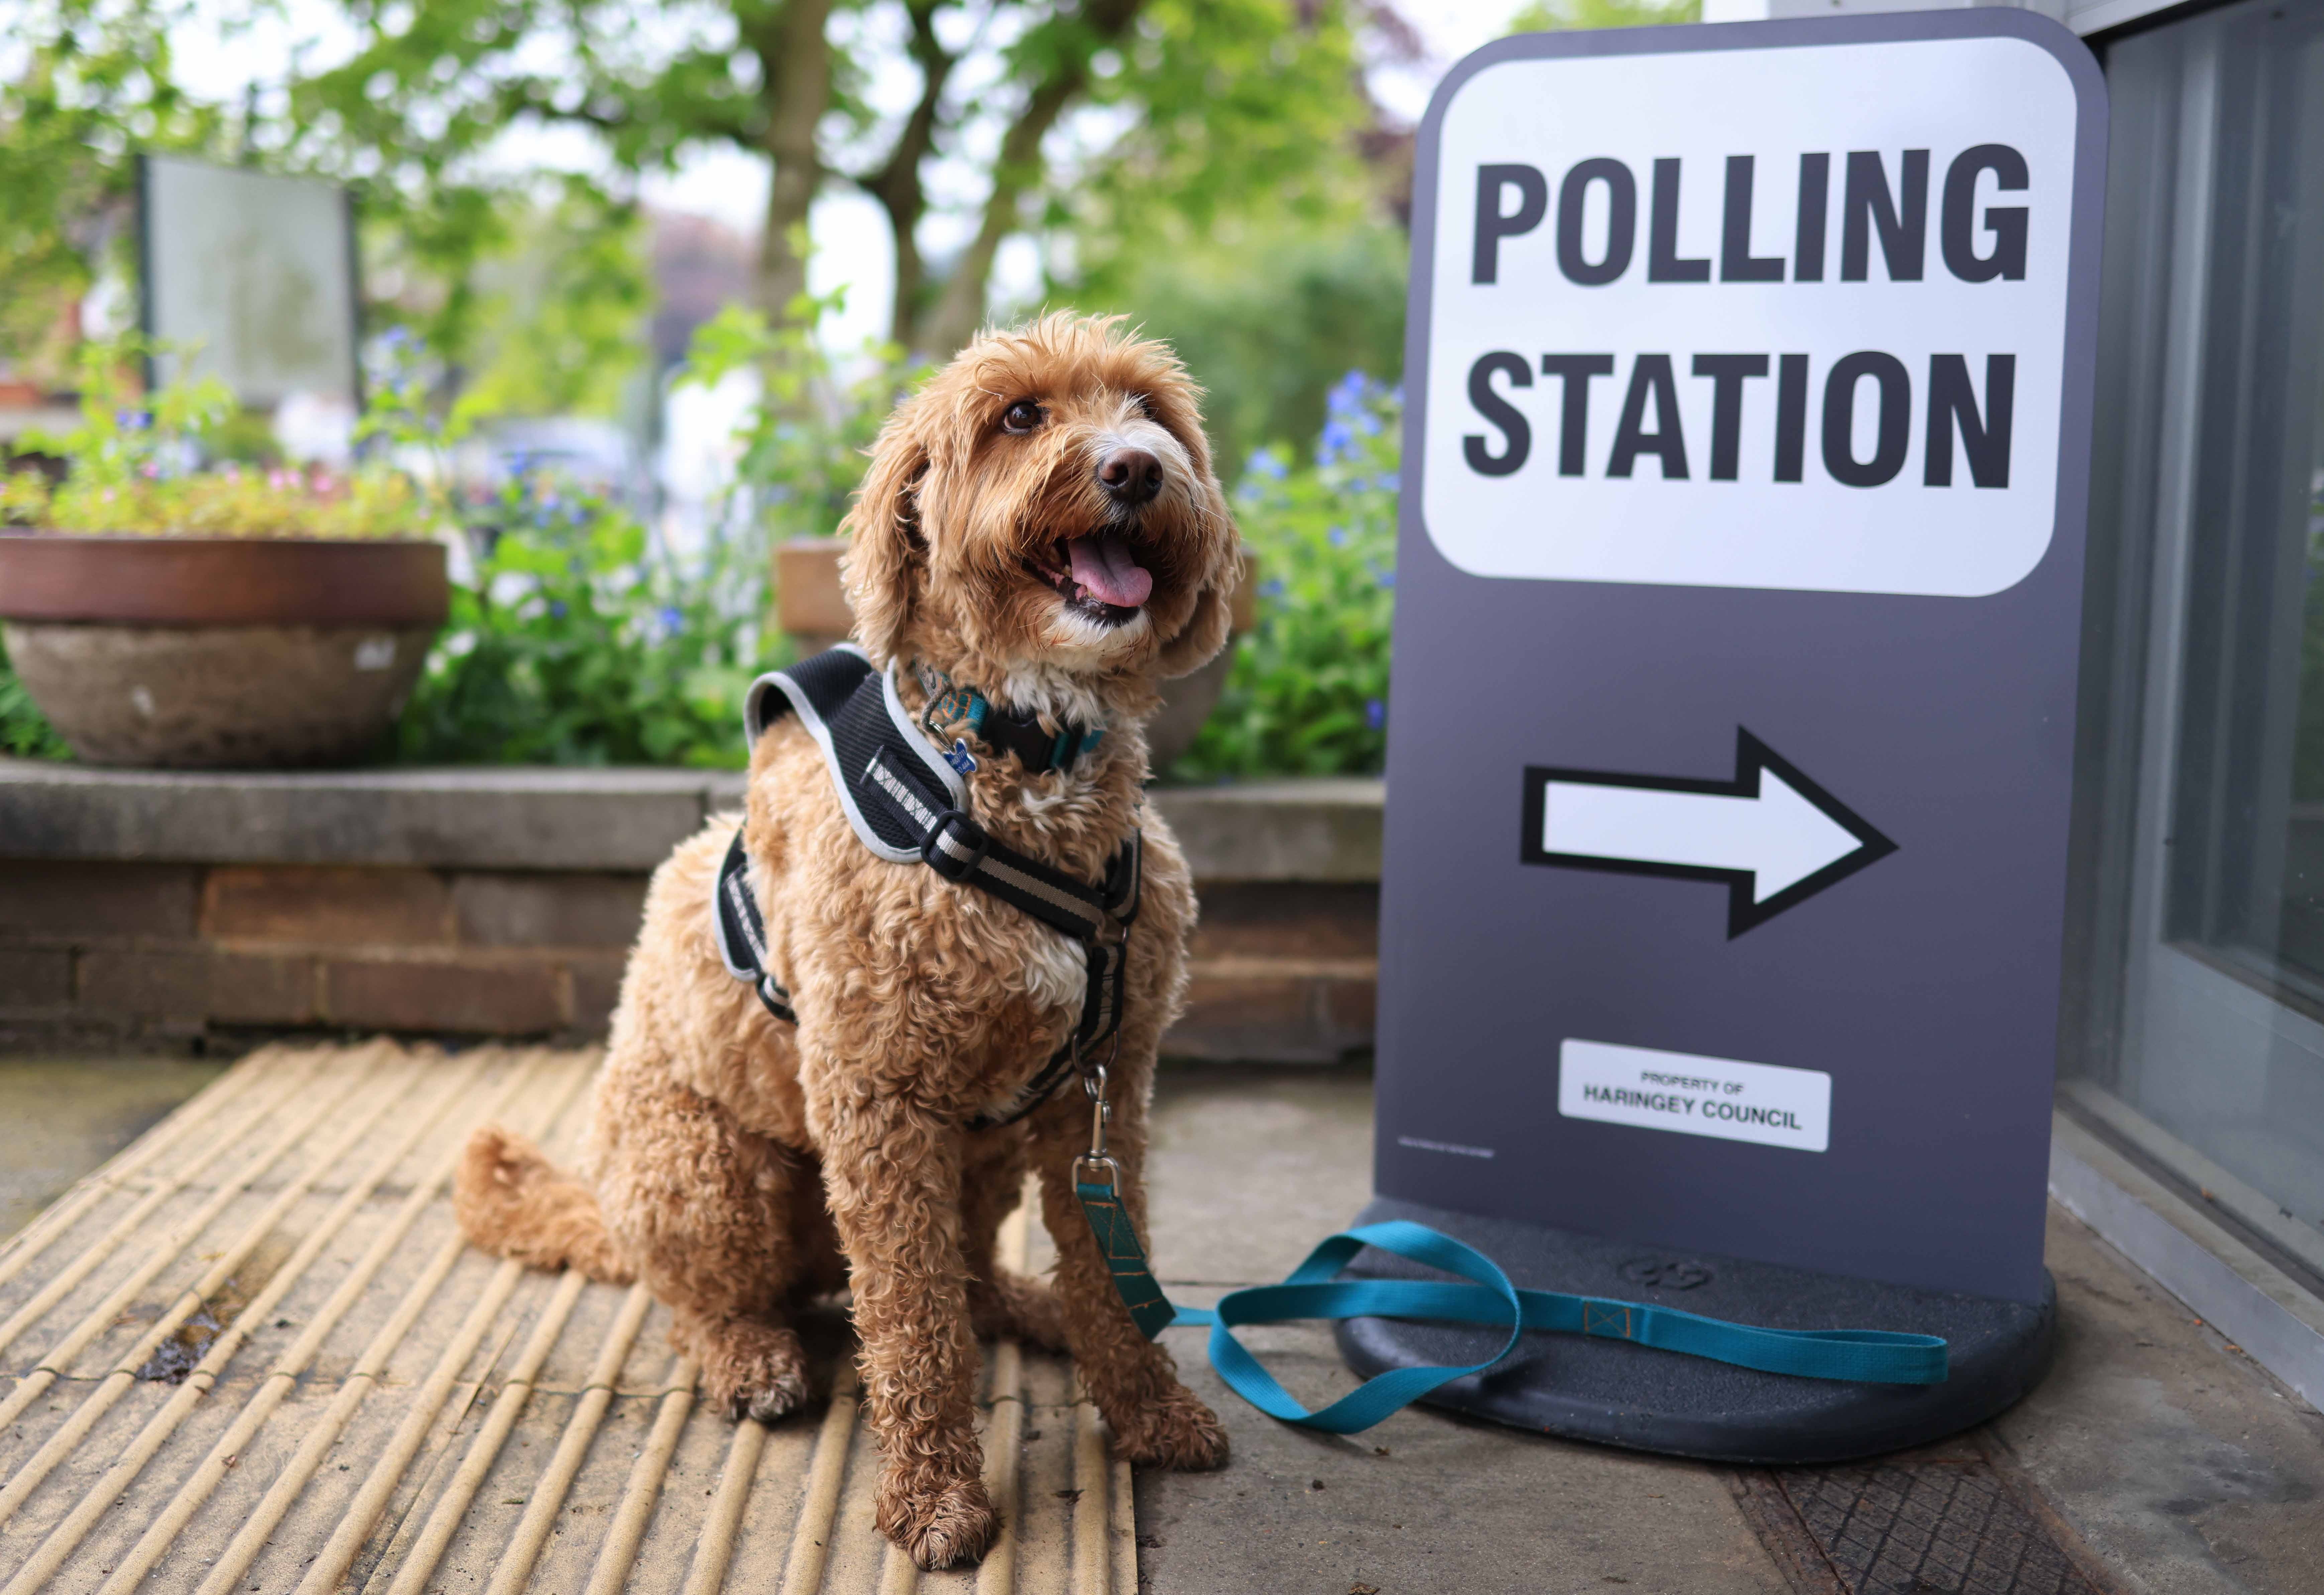 Enzo the dog, who voted in London on Thursday, things the local election results will be a treat